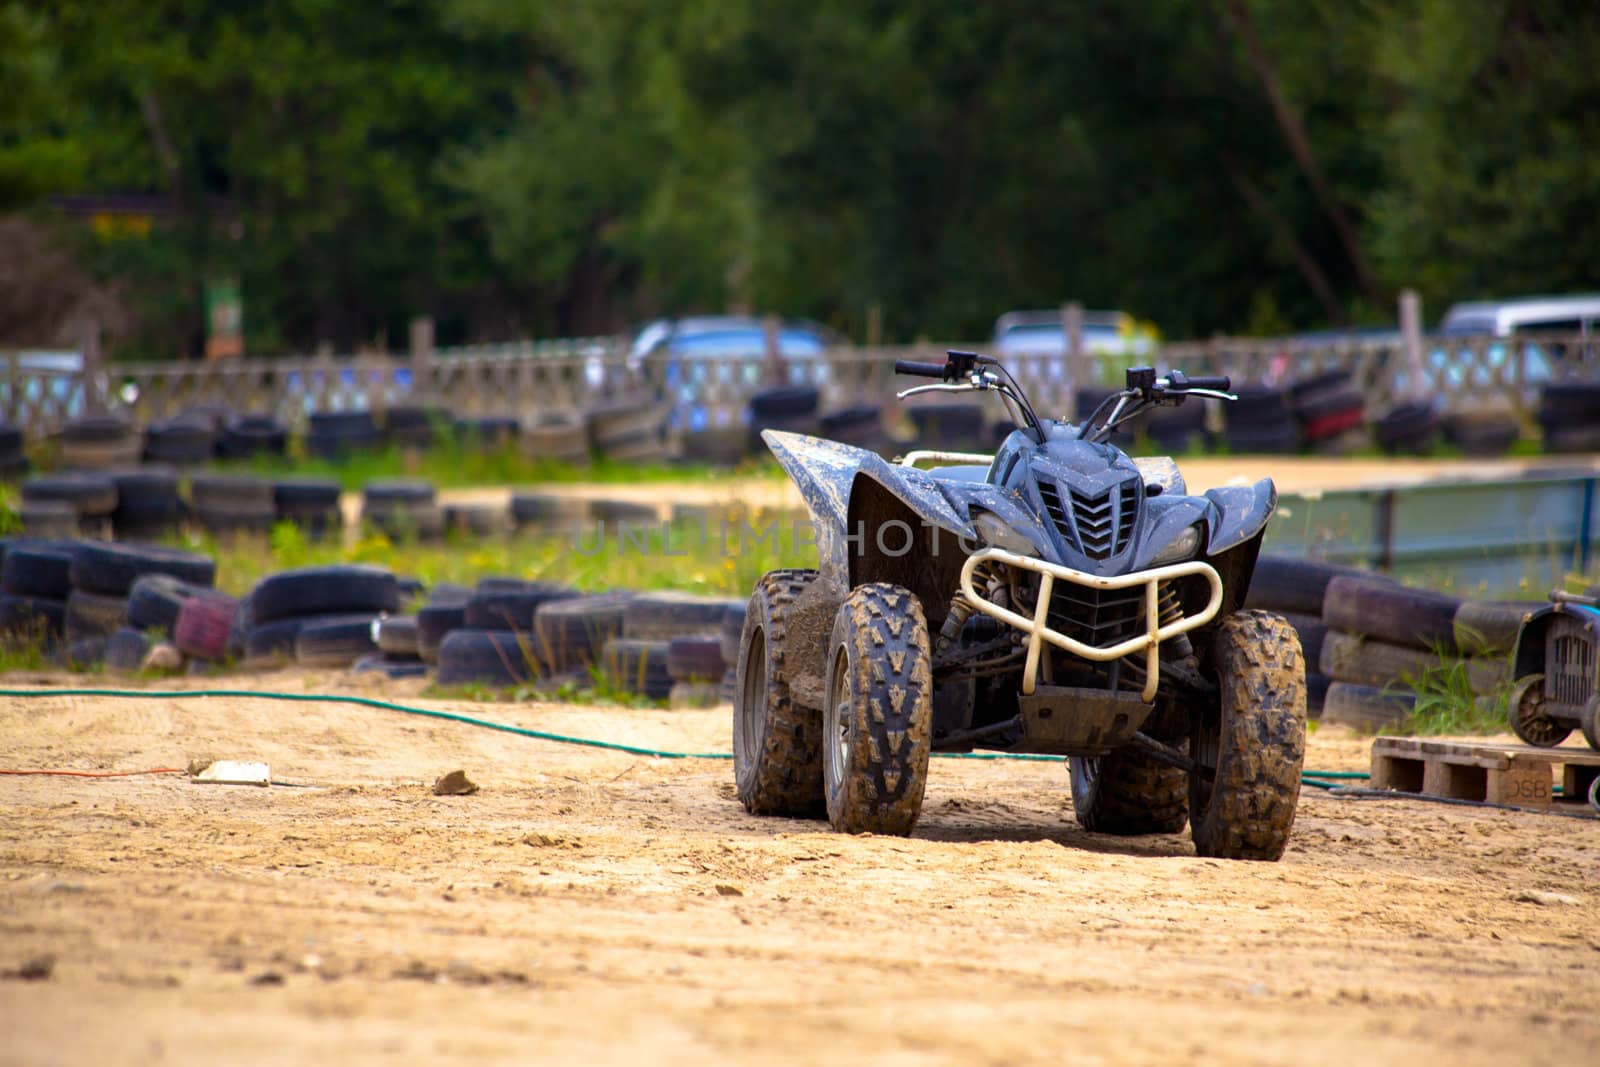 Buggy on the sandy race track
